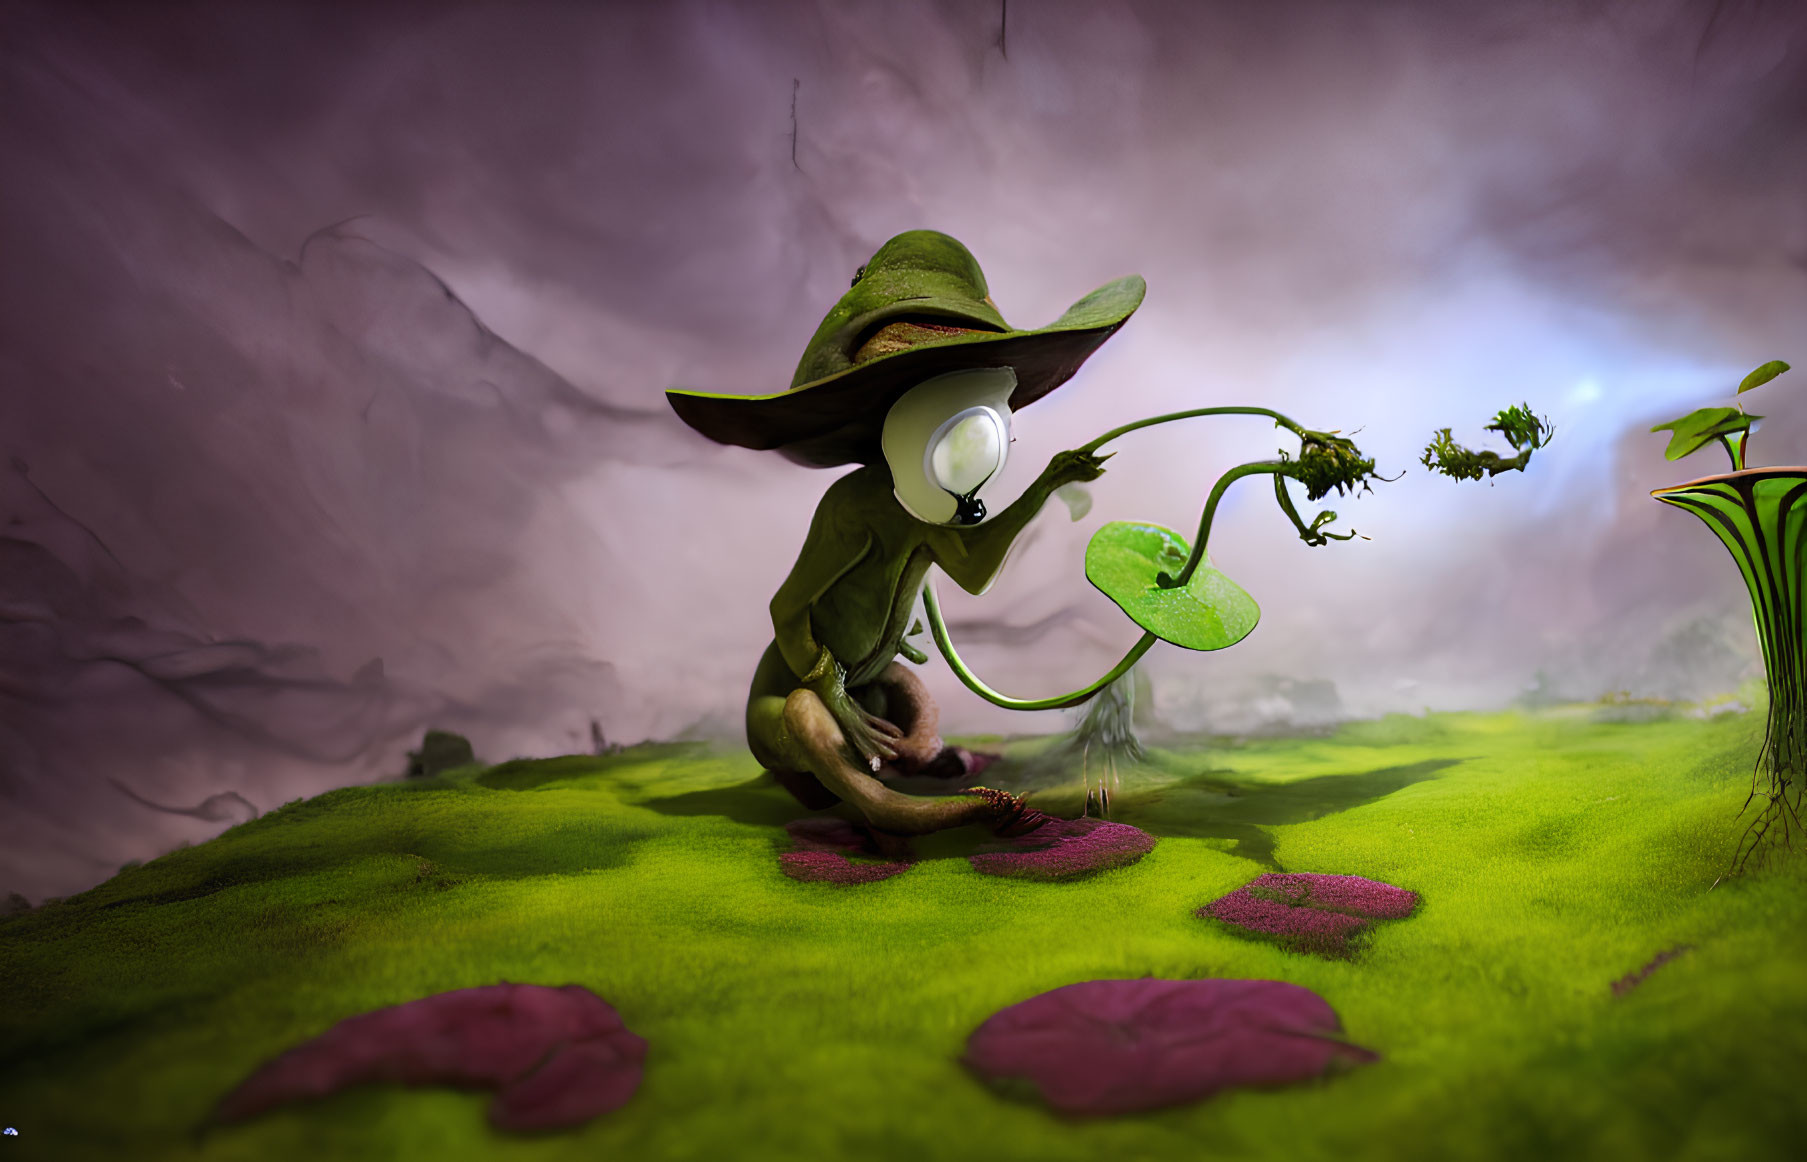 Illustration of mystical green creature with hat and lantern casting spell on blooming flower